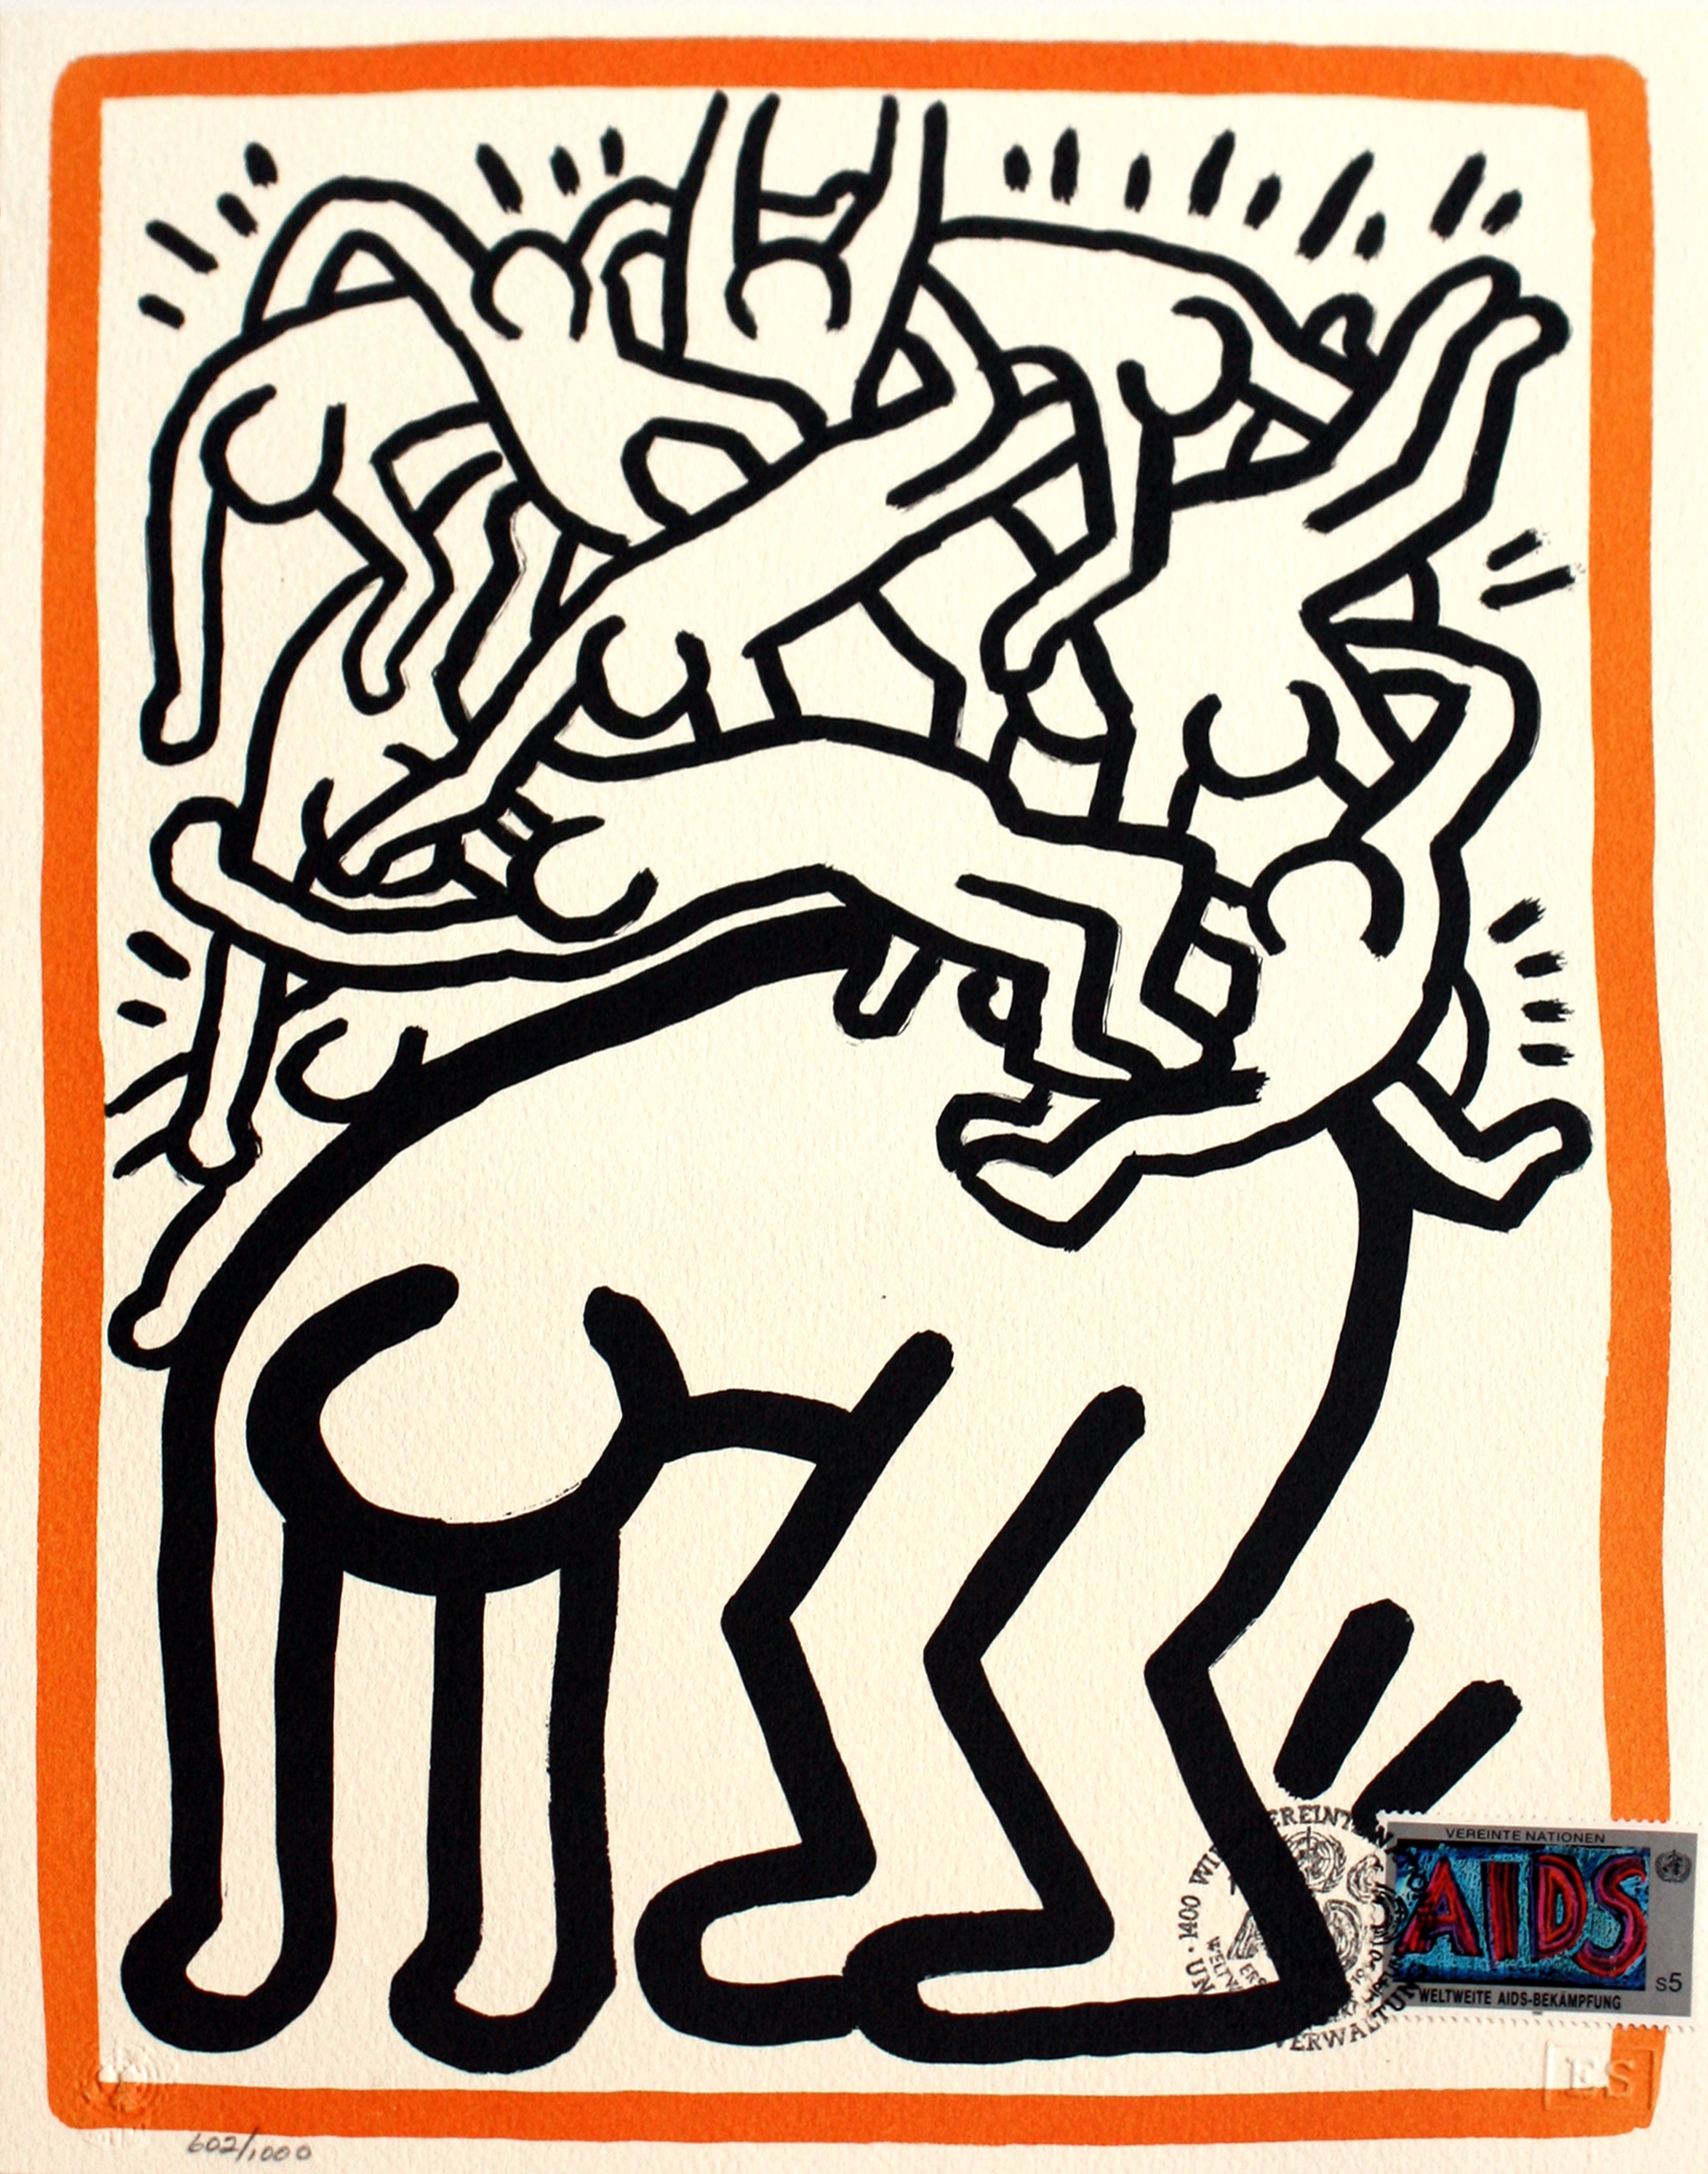 Keith Haring, Fight AIDS Worldwide